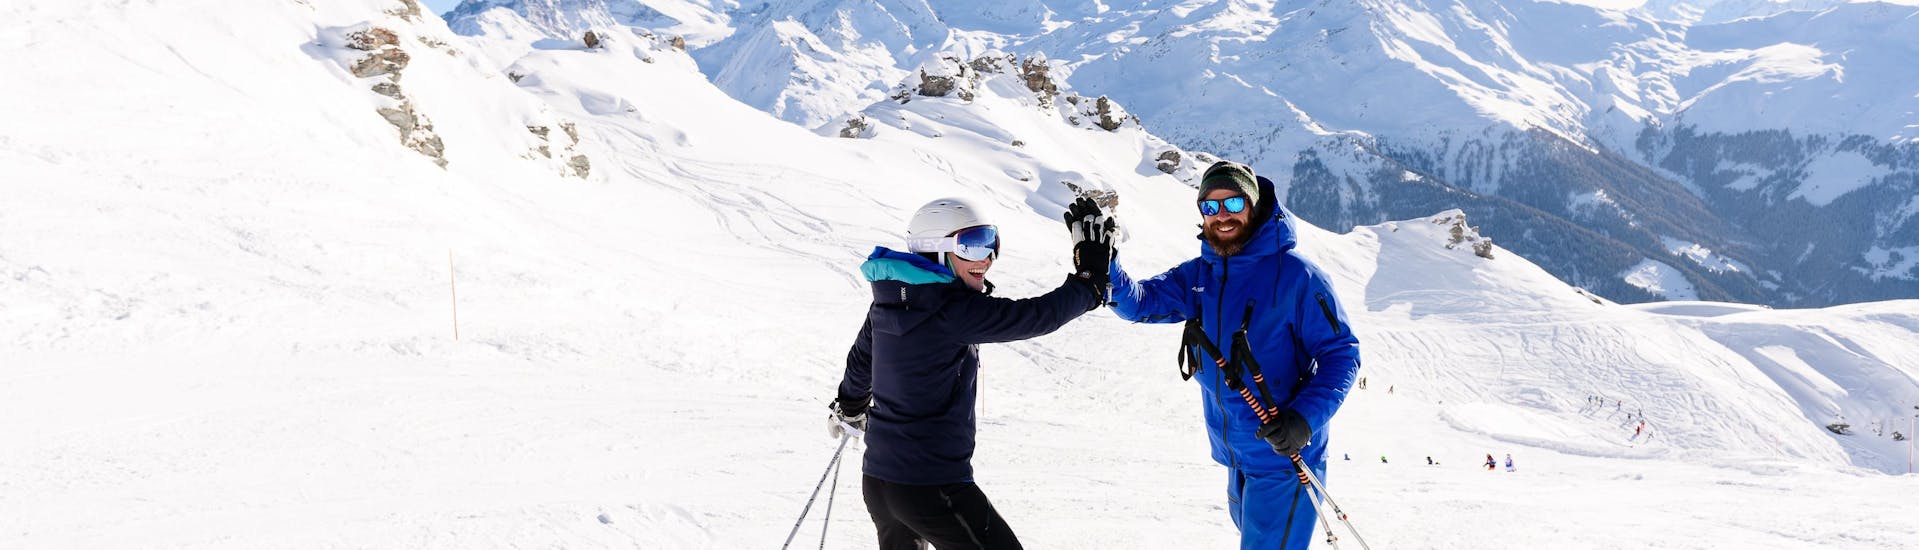 Two skiers are satisfied of their performance during the Private Ski Lessons for Adults in Verbier with Altitude Ski School Verbier & Gstaad.